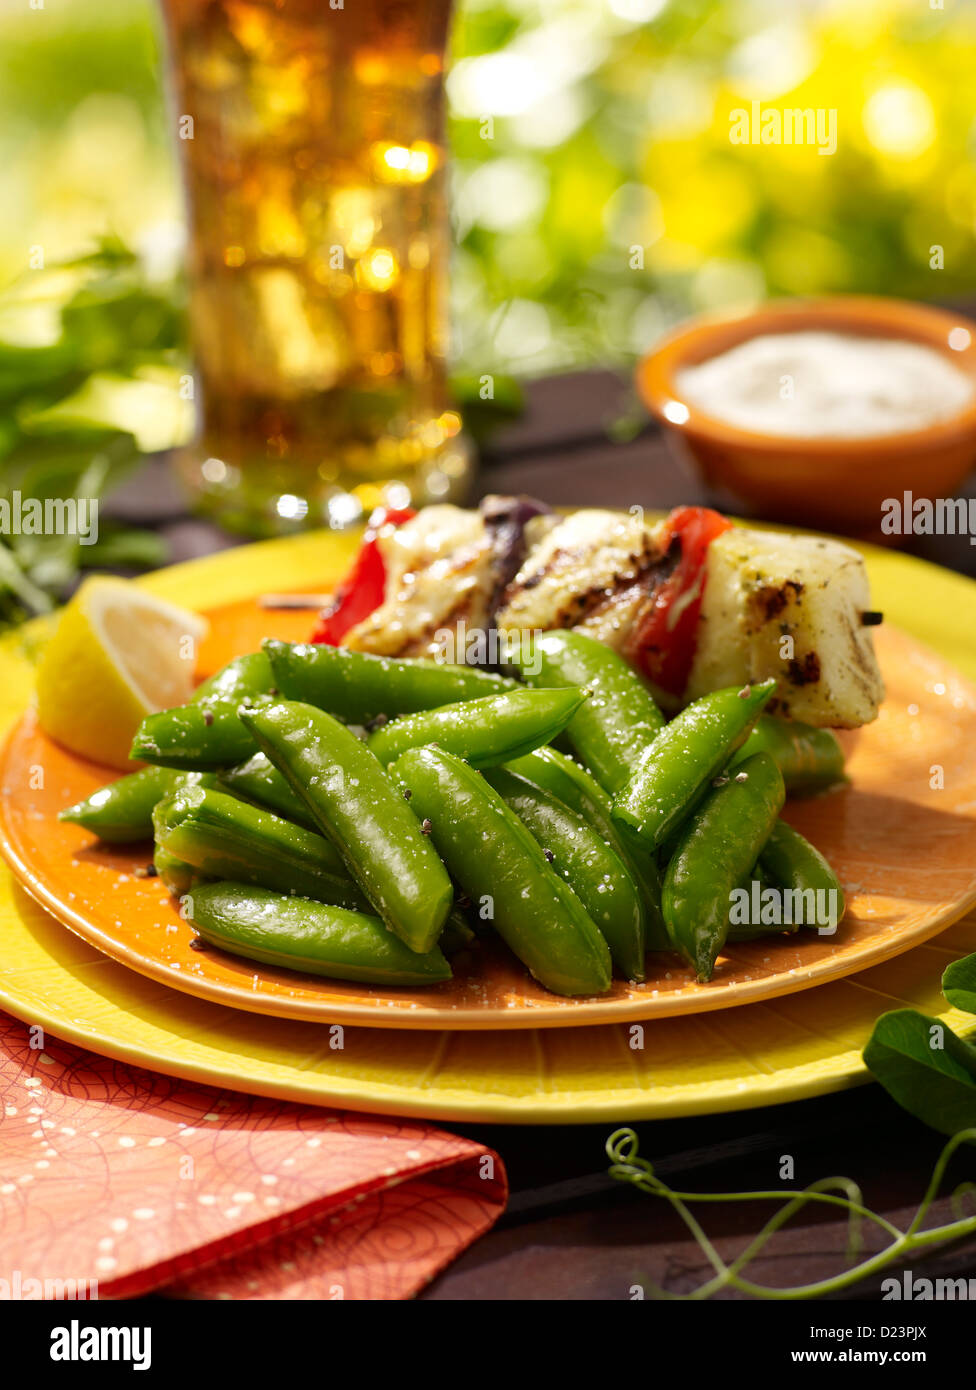 Sugar snap peas served with tofu and an ice tea in an outdoor summer setting Stock Photo